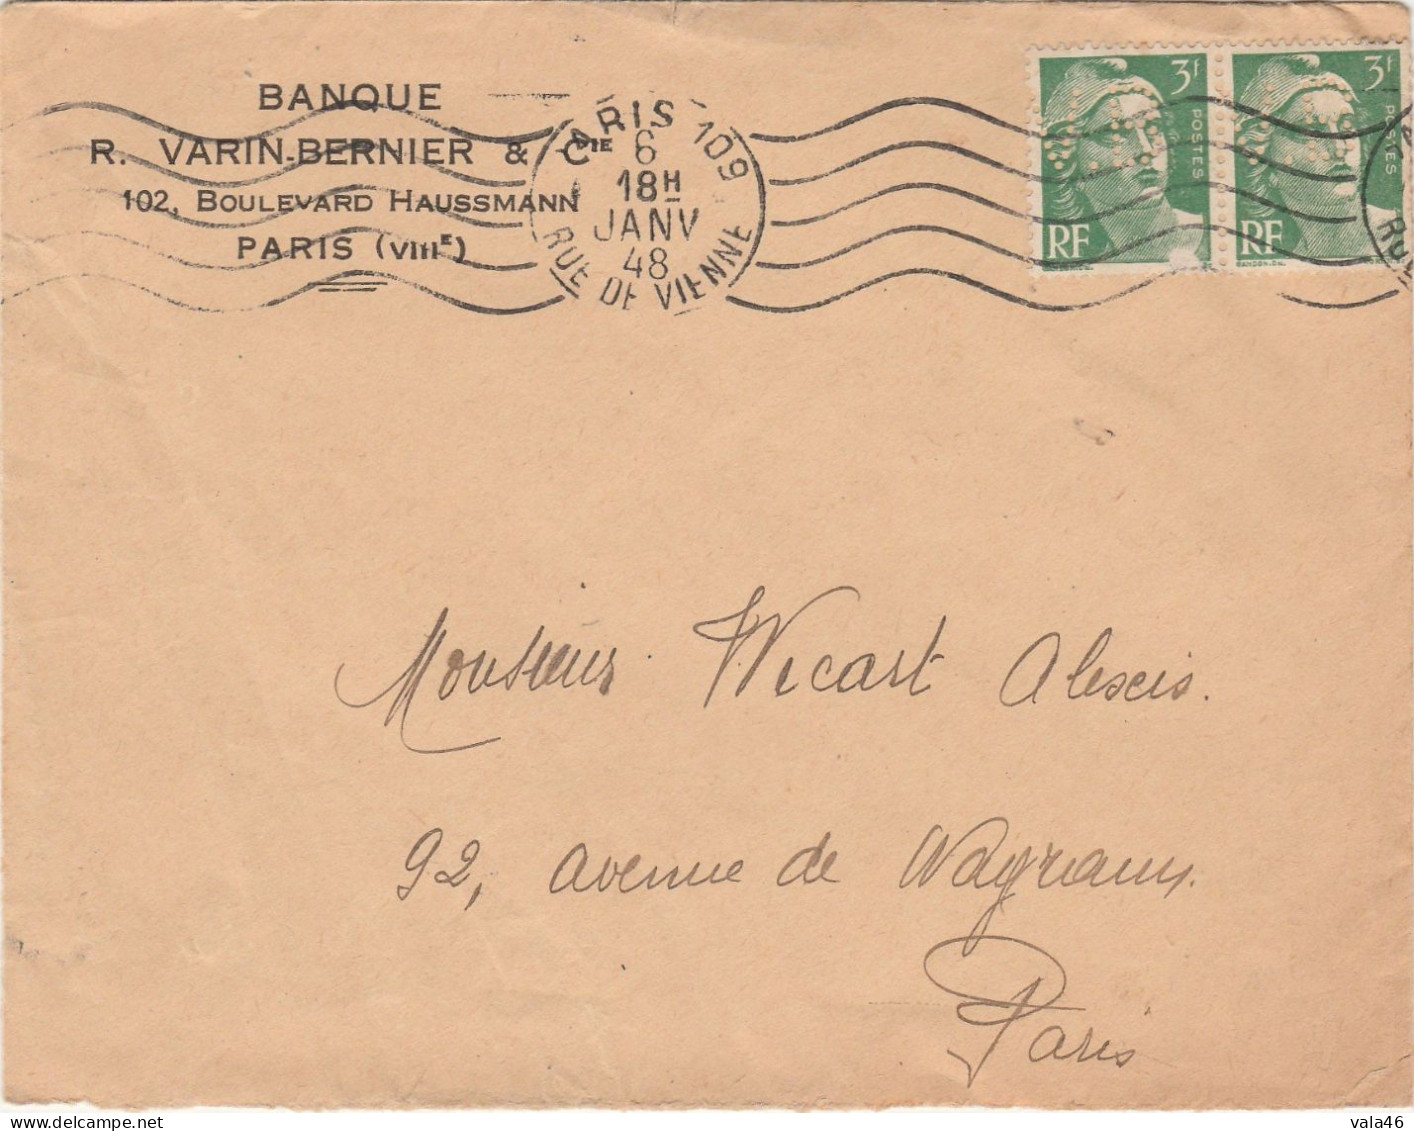 FRANCE - PERFORES  716A GANDON PAIRE  PERFORE VB  VARIN BERNIER - Lettres & Documents